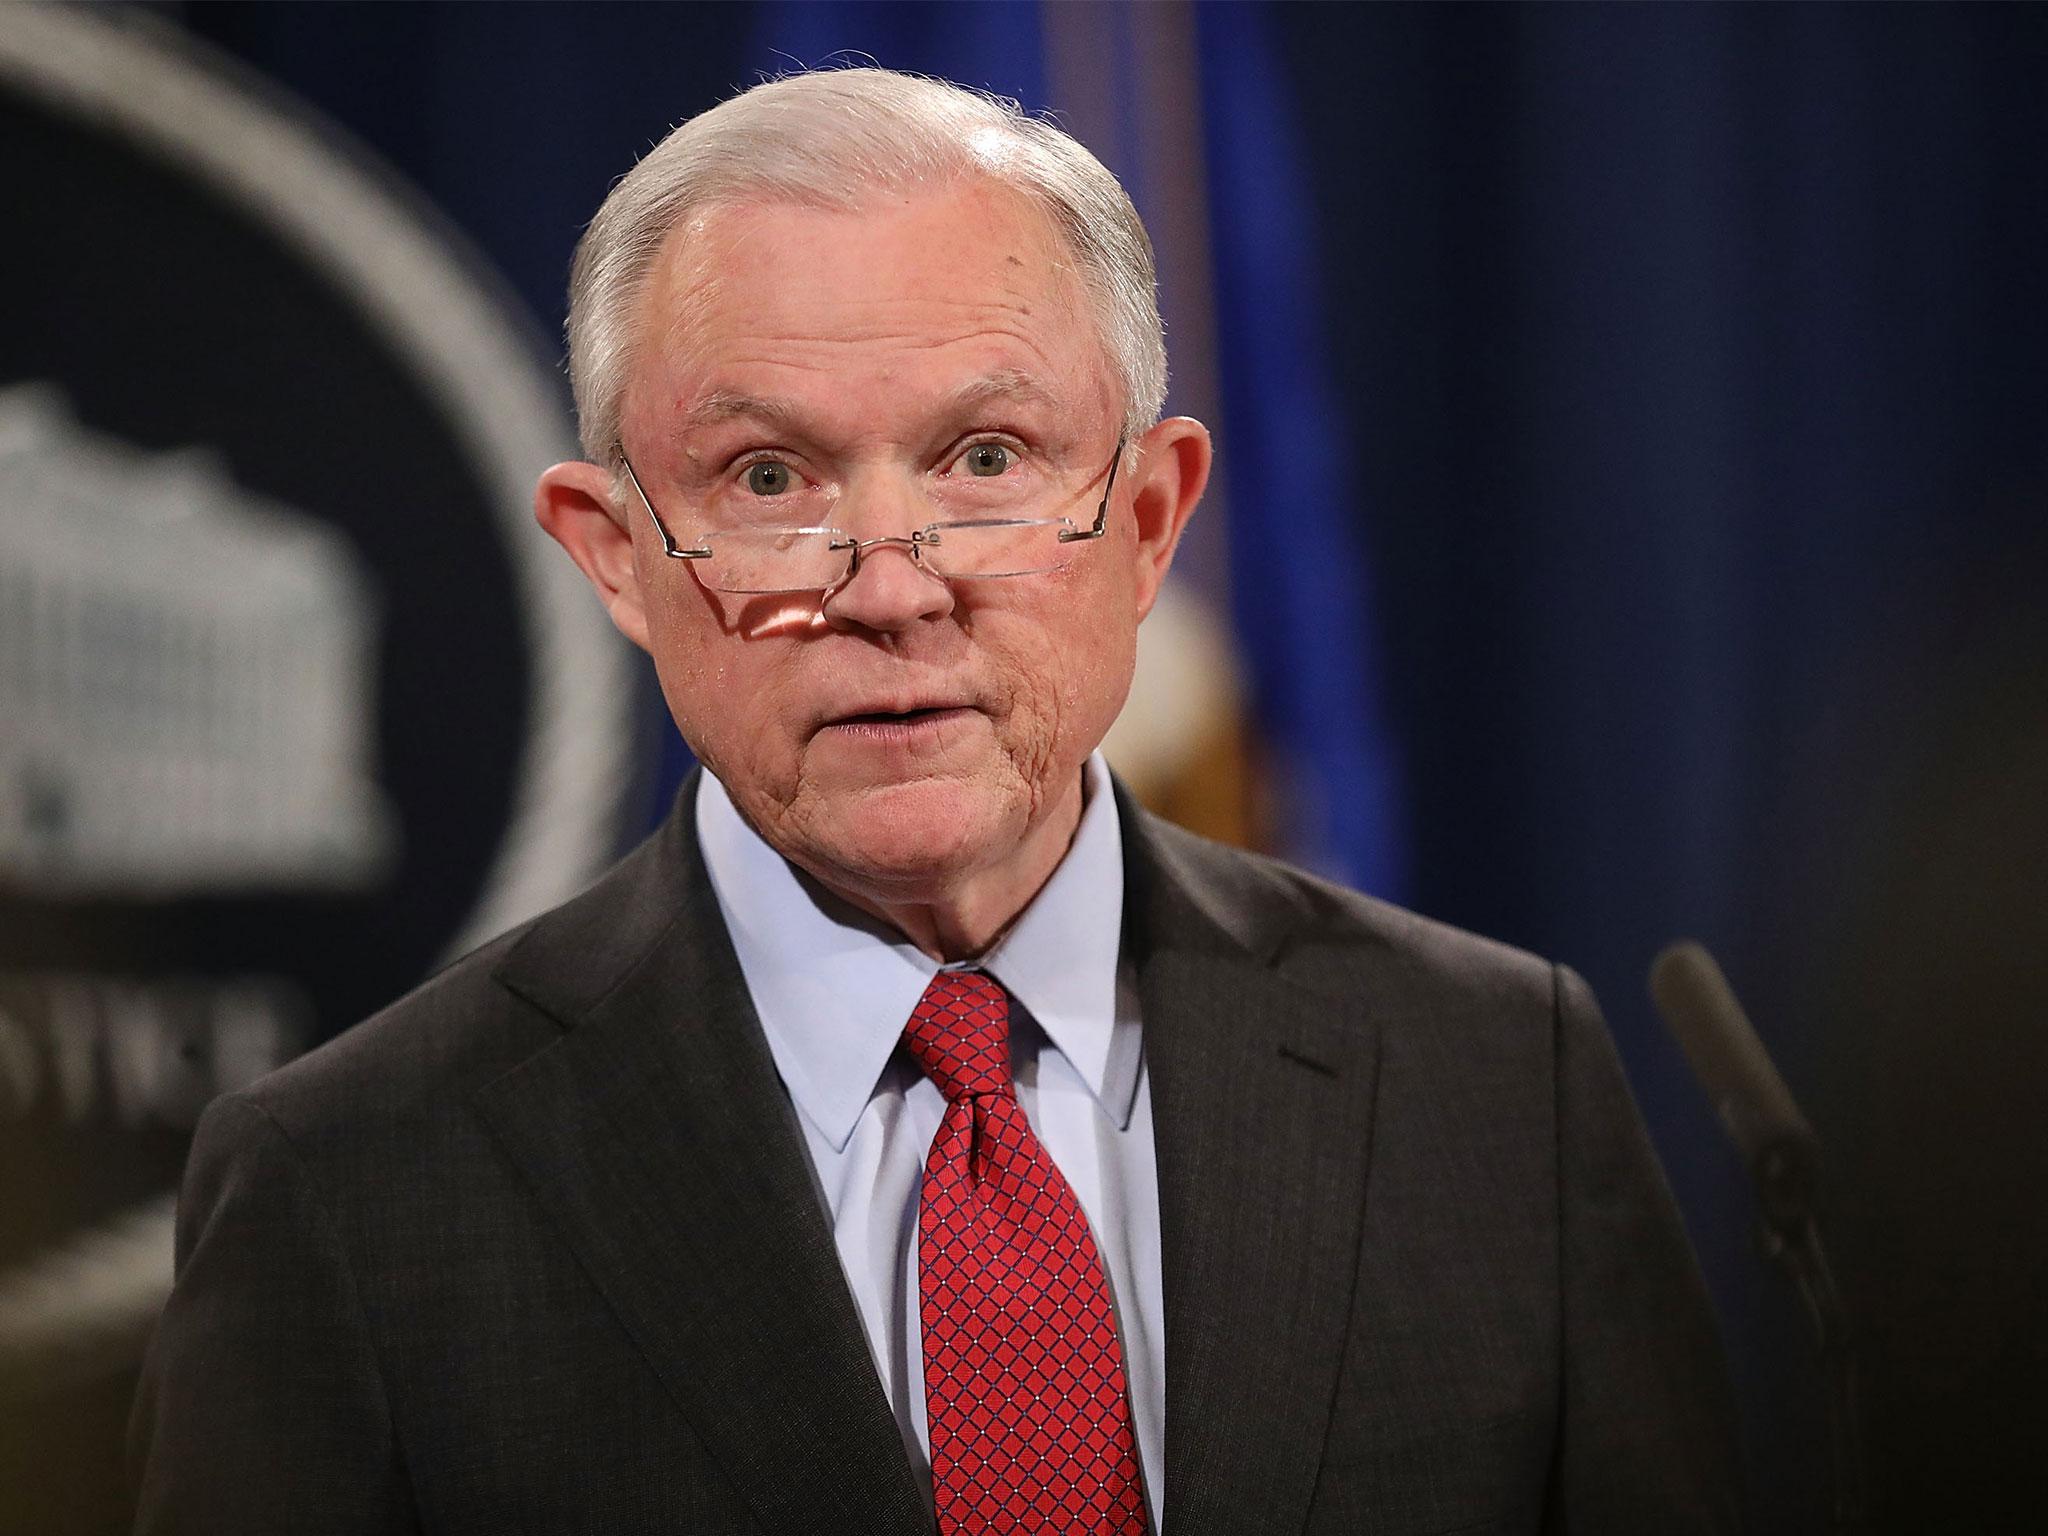 Jeff Sessions could be left to decide the fate of the exclusive album